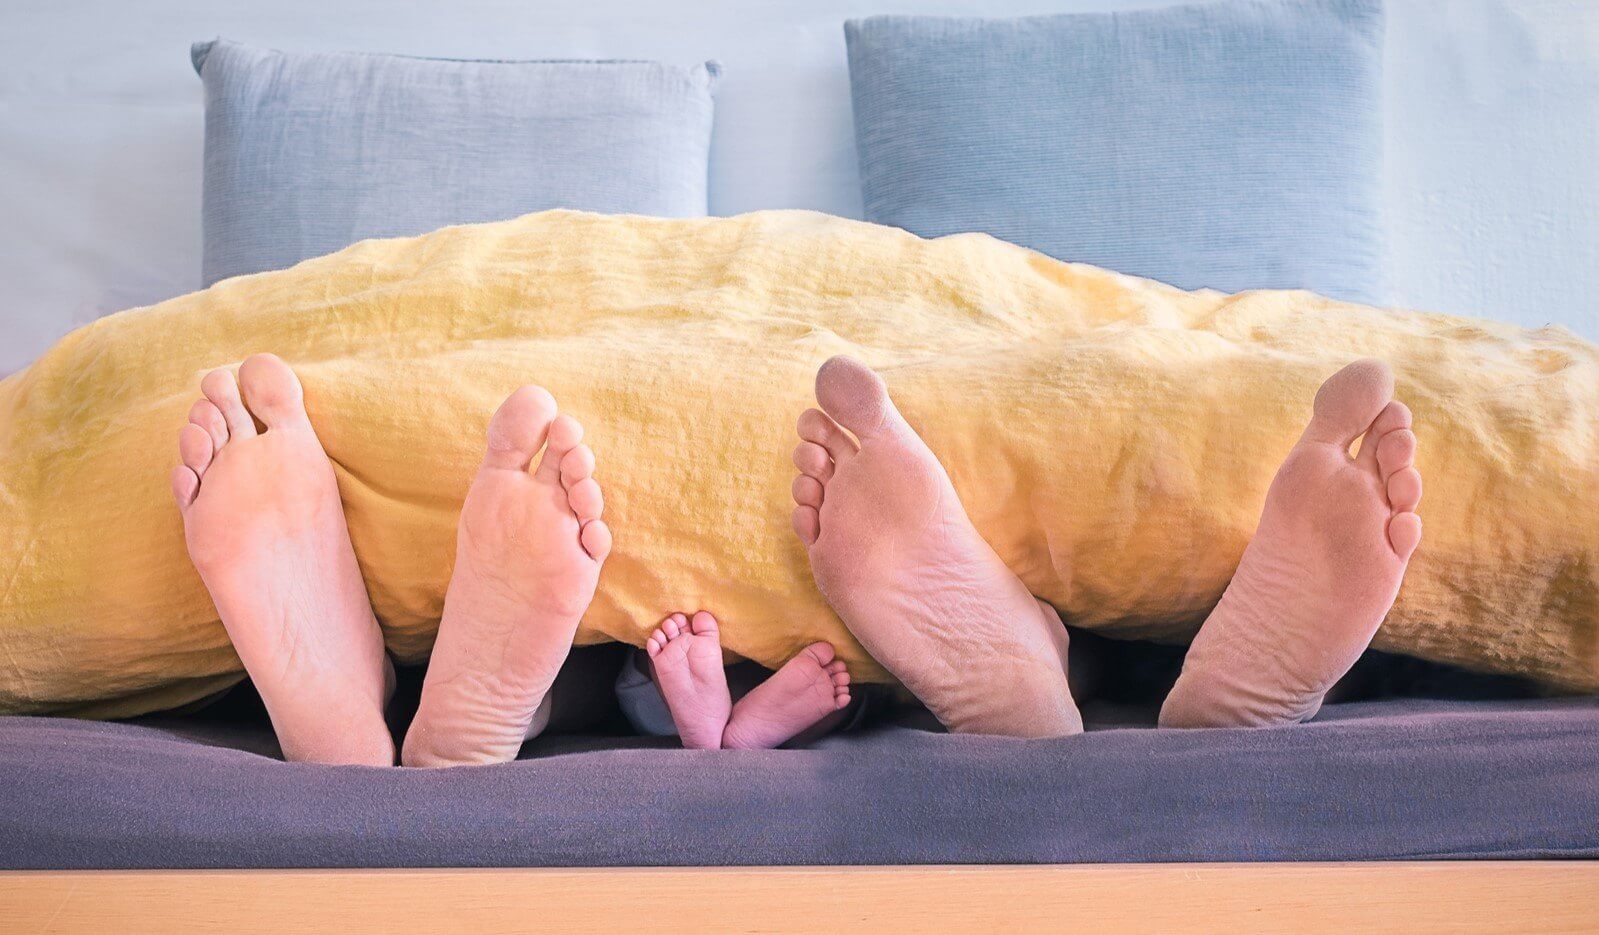 two pairs of adult feet and a small child's feet sticking out of duvet